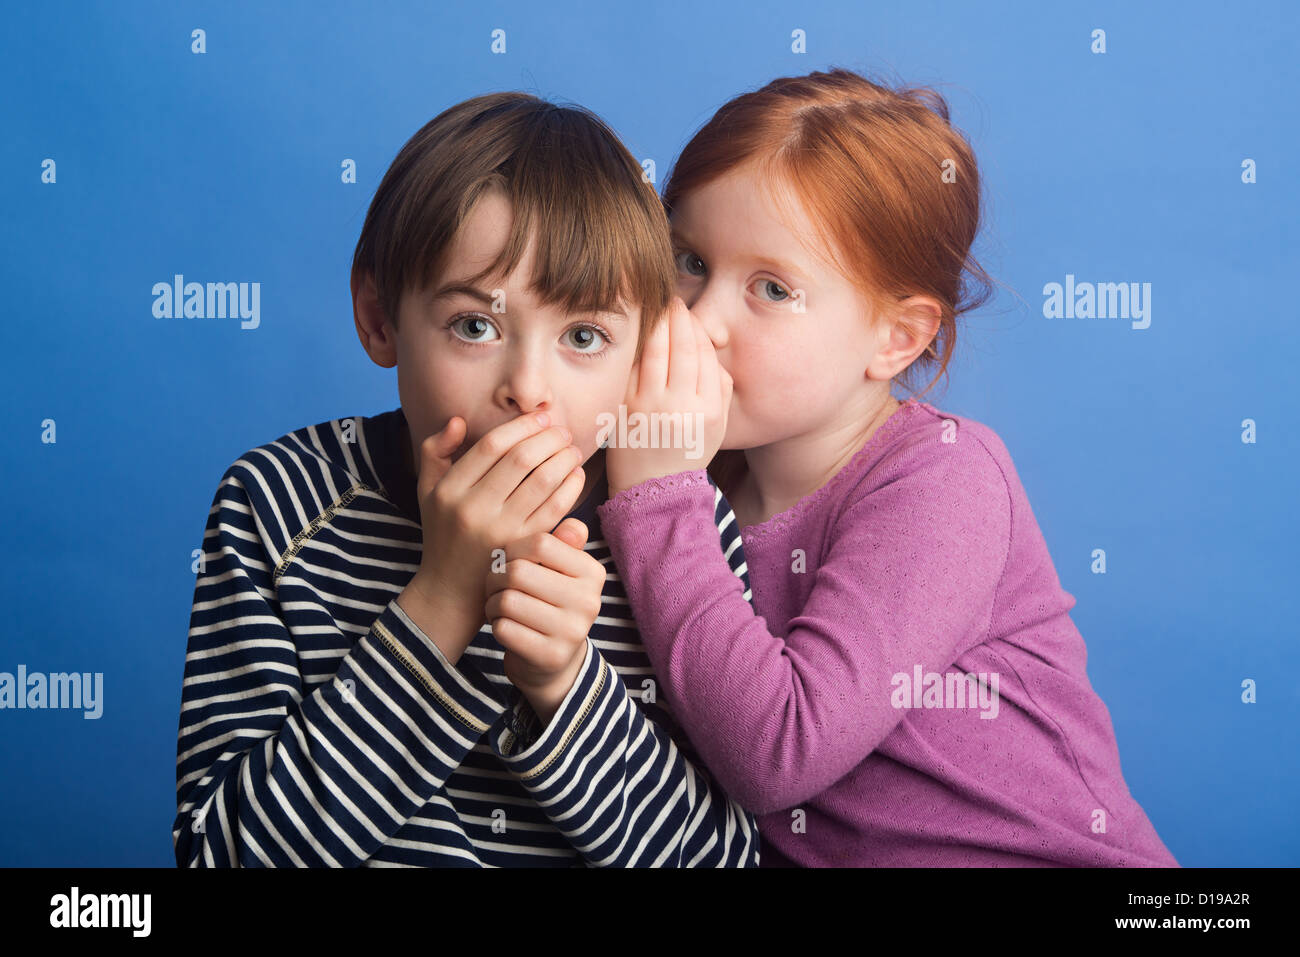 Girl aged 6 and boy 8 on a blue background whispering in ear to improve hearing. Showing use of the sense to hear. Stock Photo